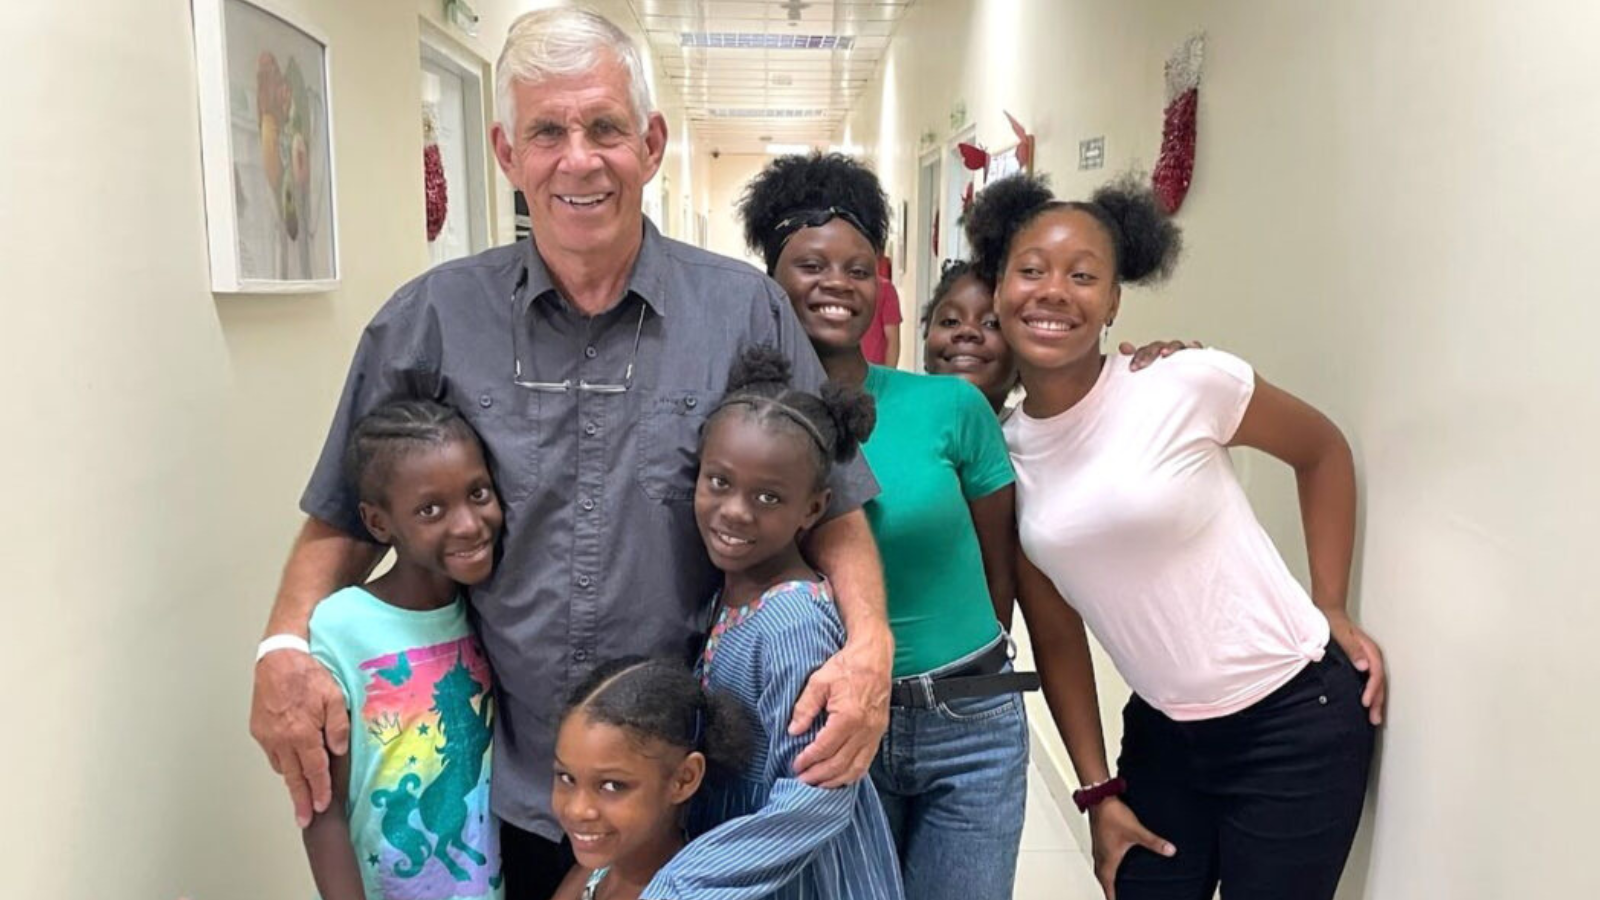 Dr. Tom Dickinson, former president and chair of the board at Revere Health providing medical services and hope to families in the Dominican Republic